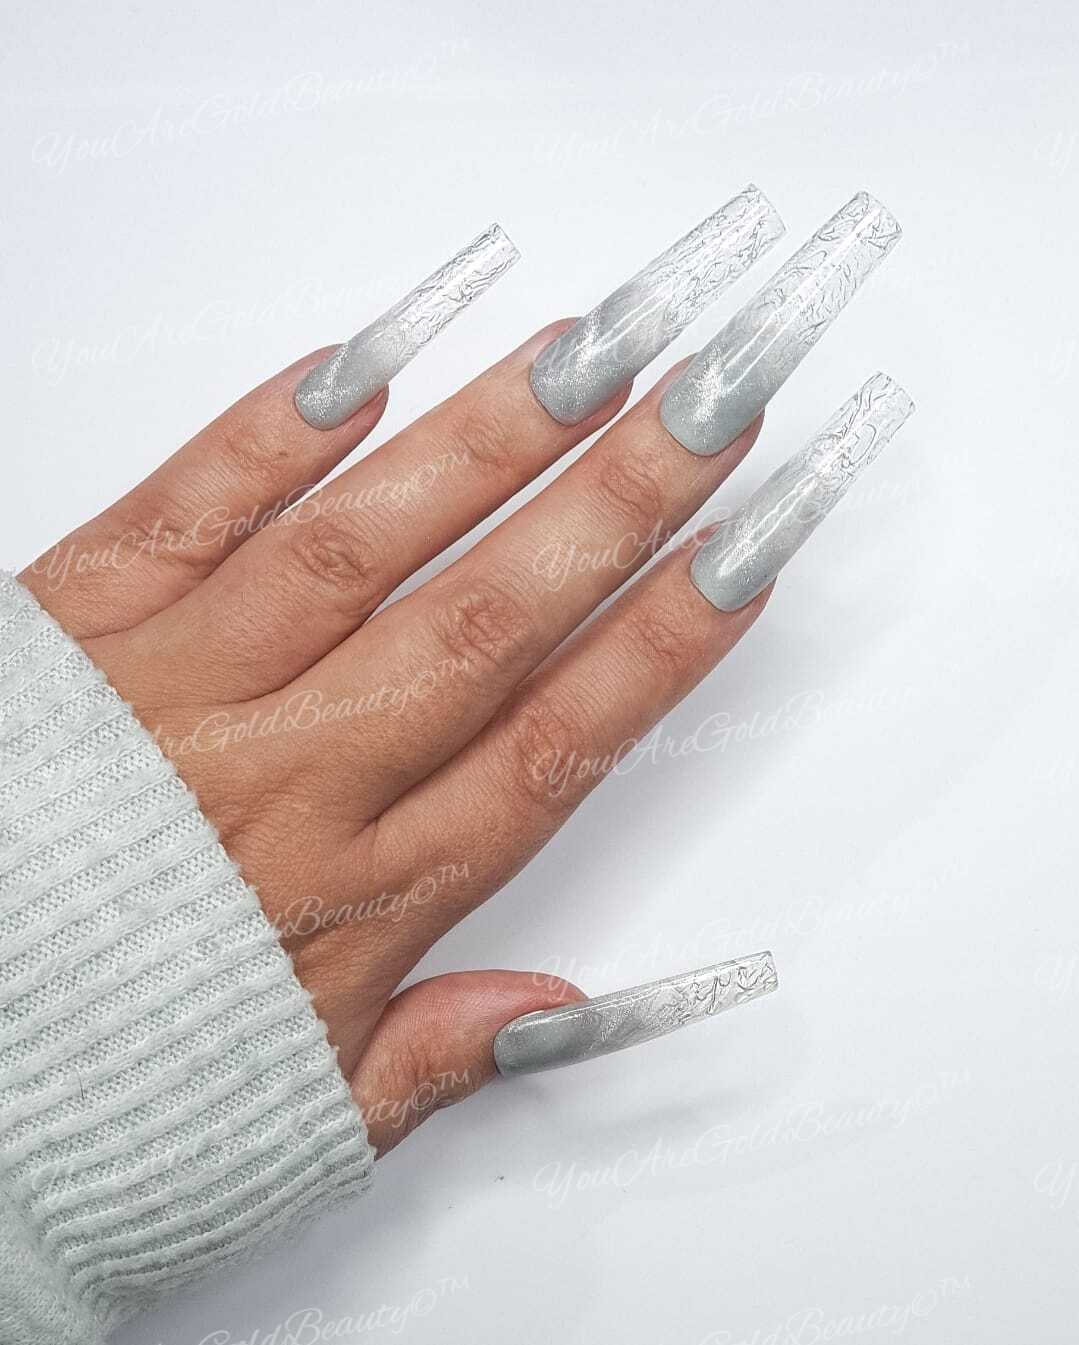 Icicle tip nails design ice square shape nails long square nail designs cat eye nails cat eye nails designs  